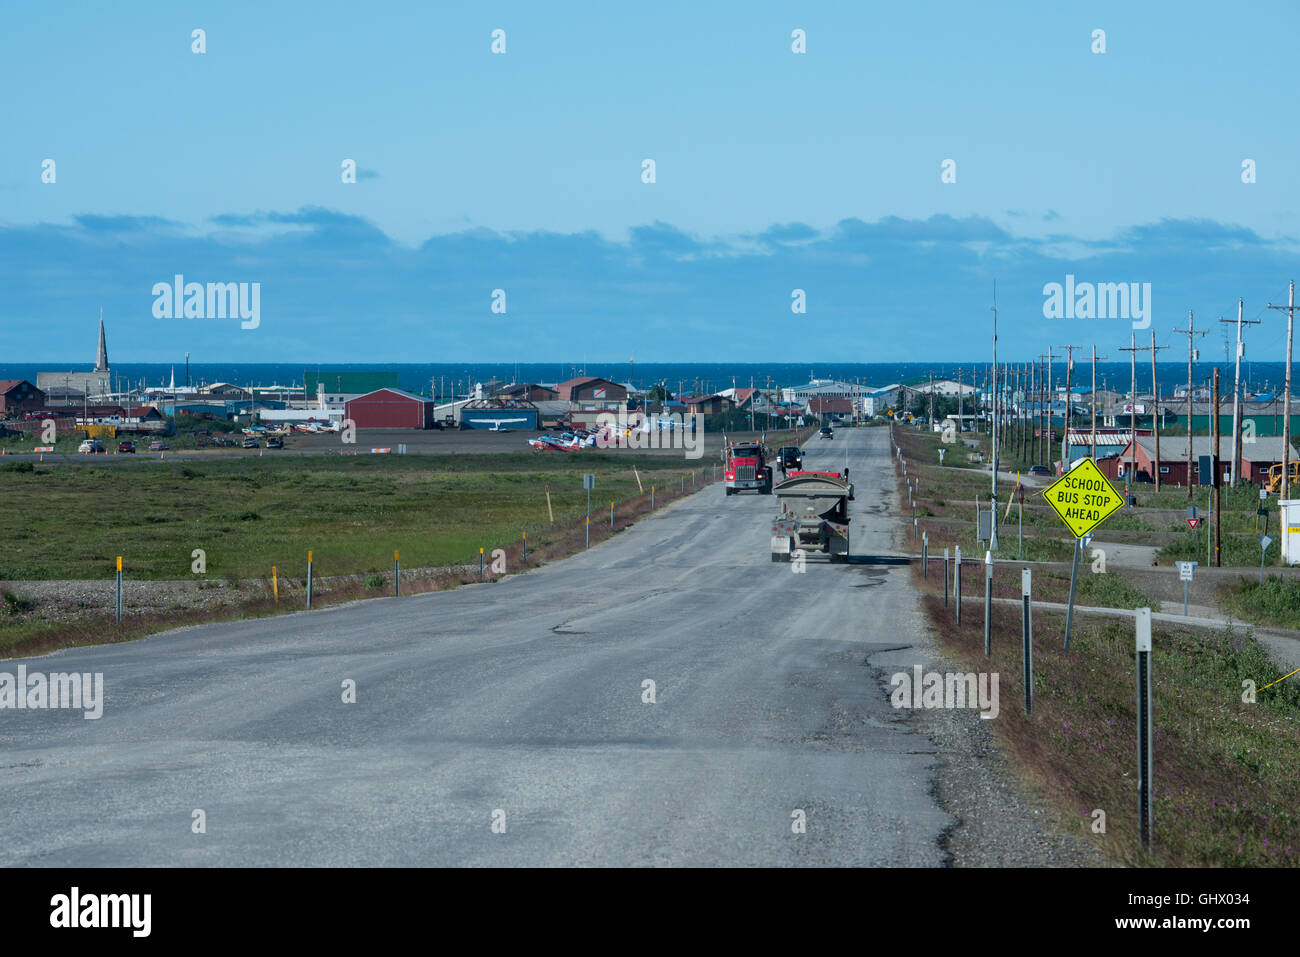 Alaska, Seward Peninsula, Nome. Trucks on Teller Road with the town of Nome in the distance. Stock Photo